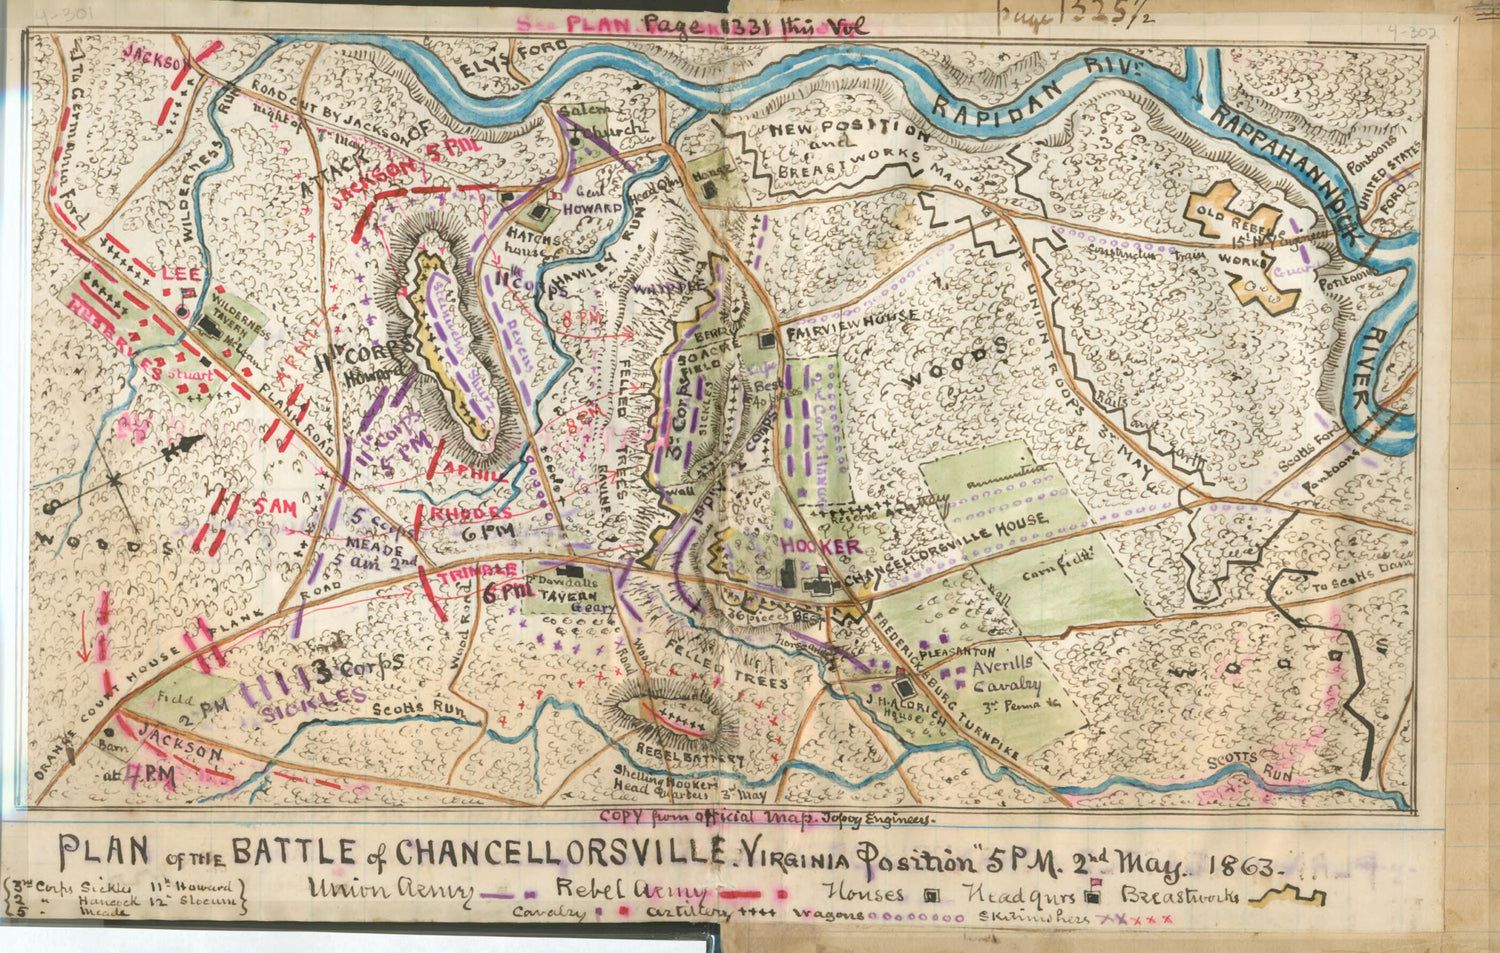 This old map of Plan of the Battle of Chancellorsville. Virginia Position, 5 P.m., 2nd May 1863 from 05-02 was created by Robert Knox Sneden in 05-02